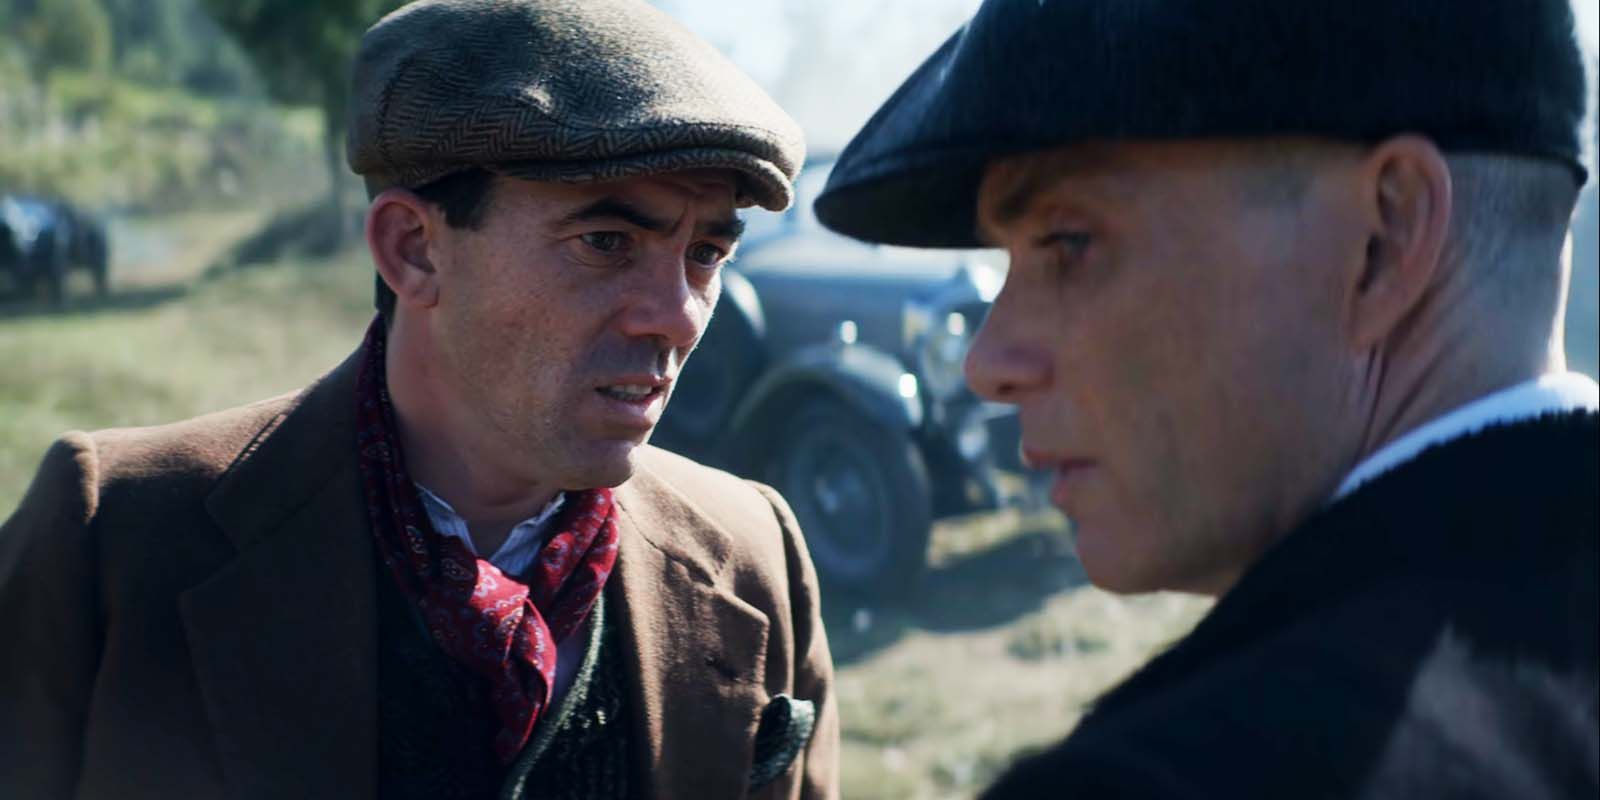 Packy Lee as Johnny Dogs and Cillian Murphy as Tommy Shelby in Peaky Blinders season 5